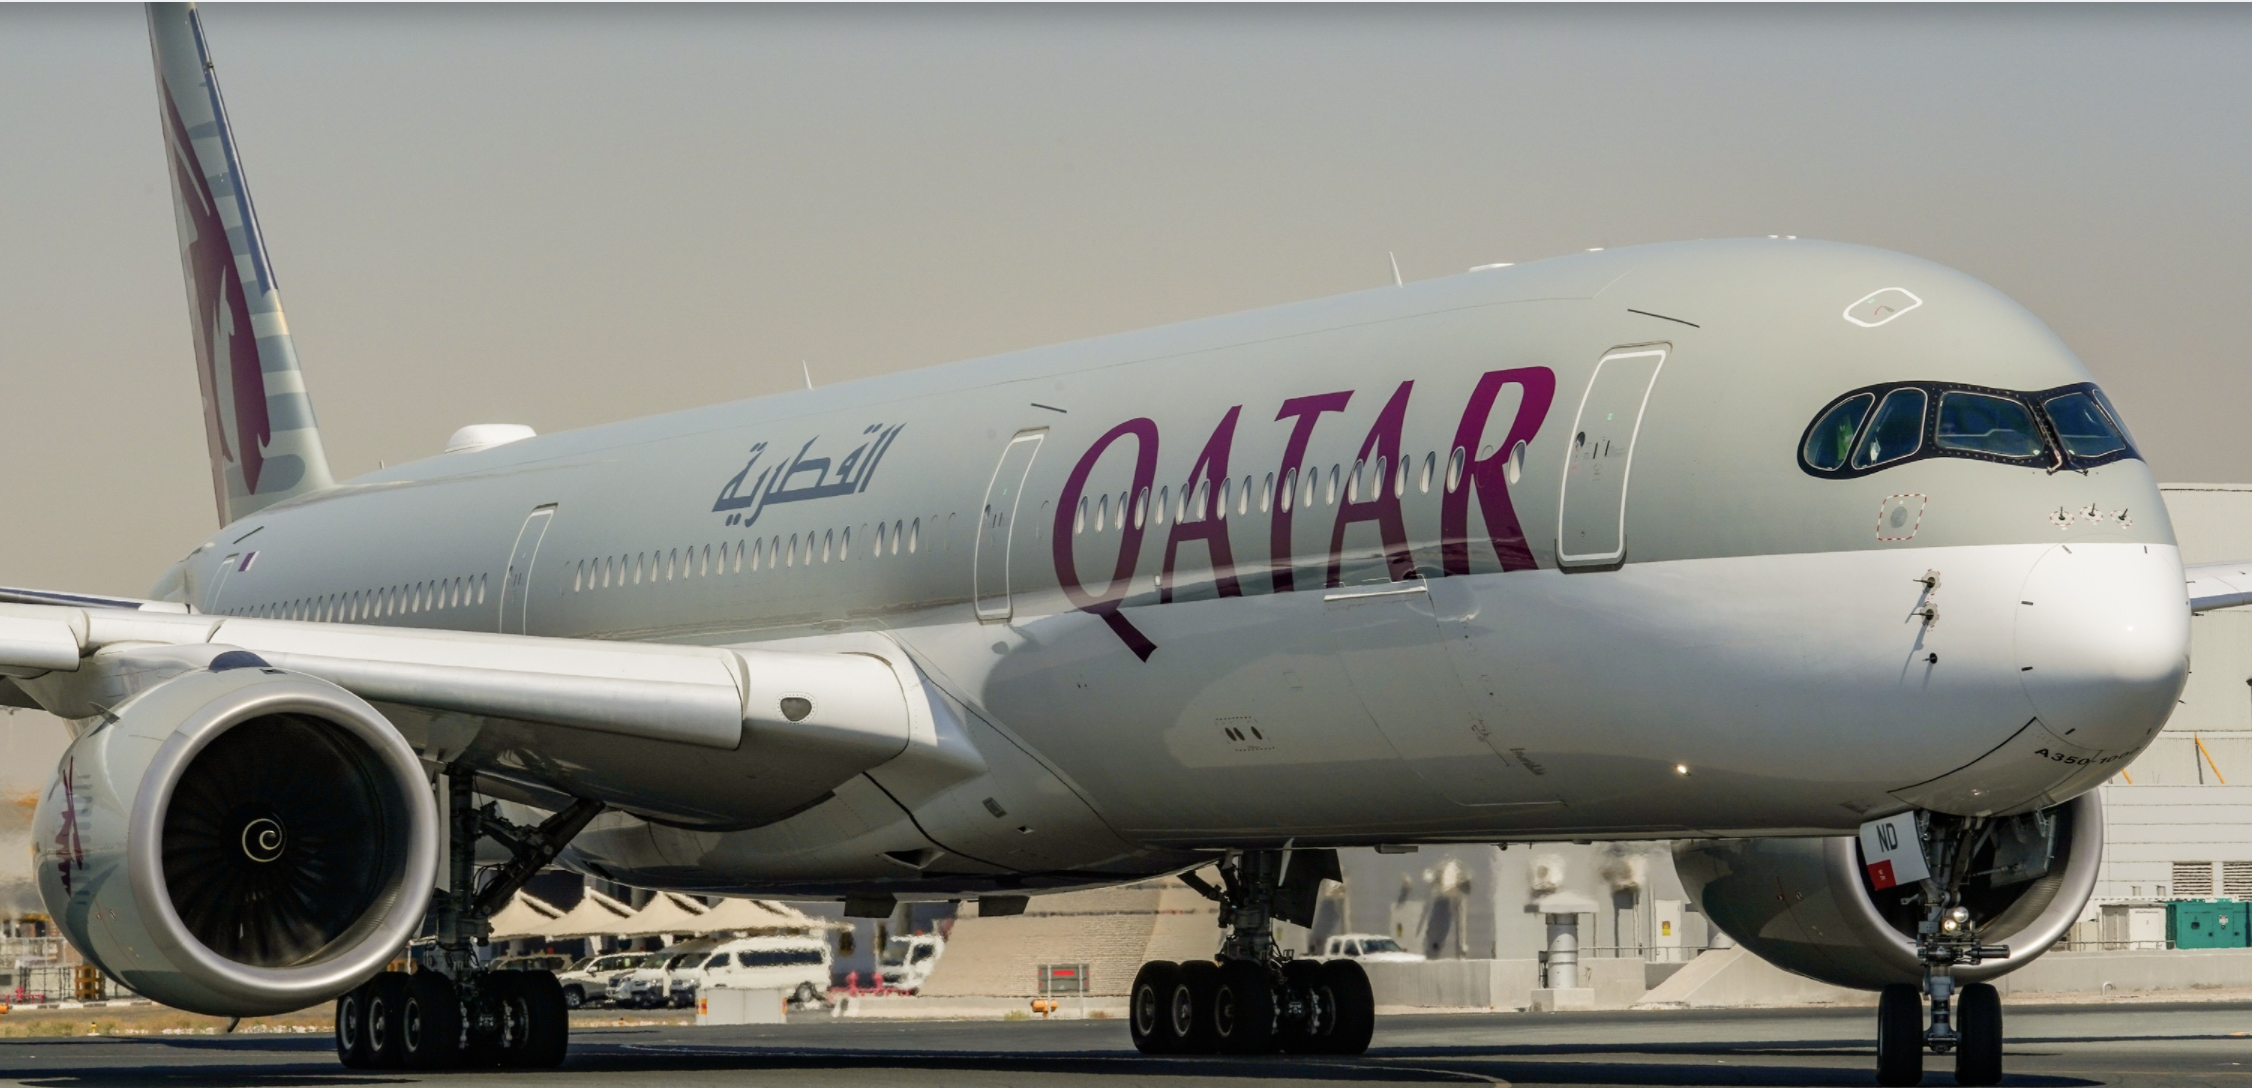 Passengers and crew injured after turbulence on flight from Doha to Dublin